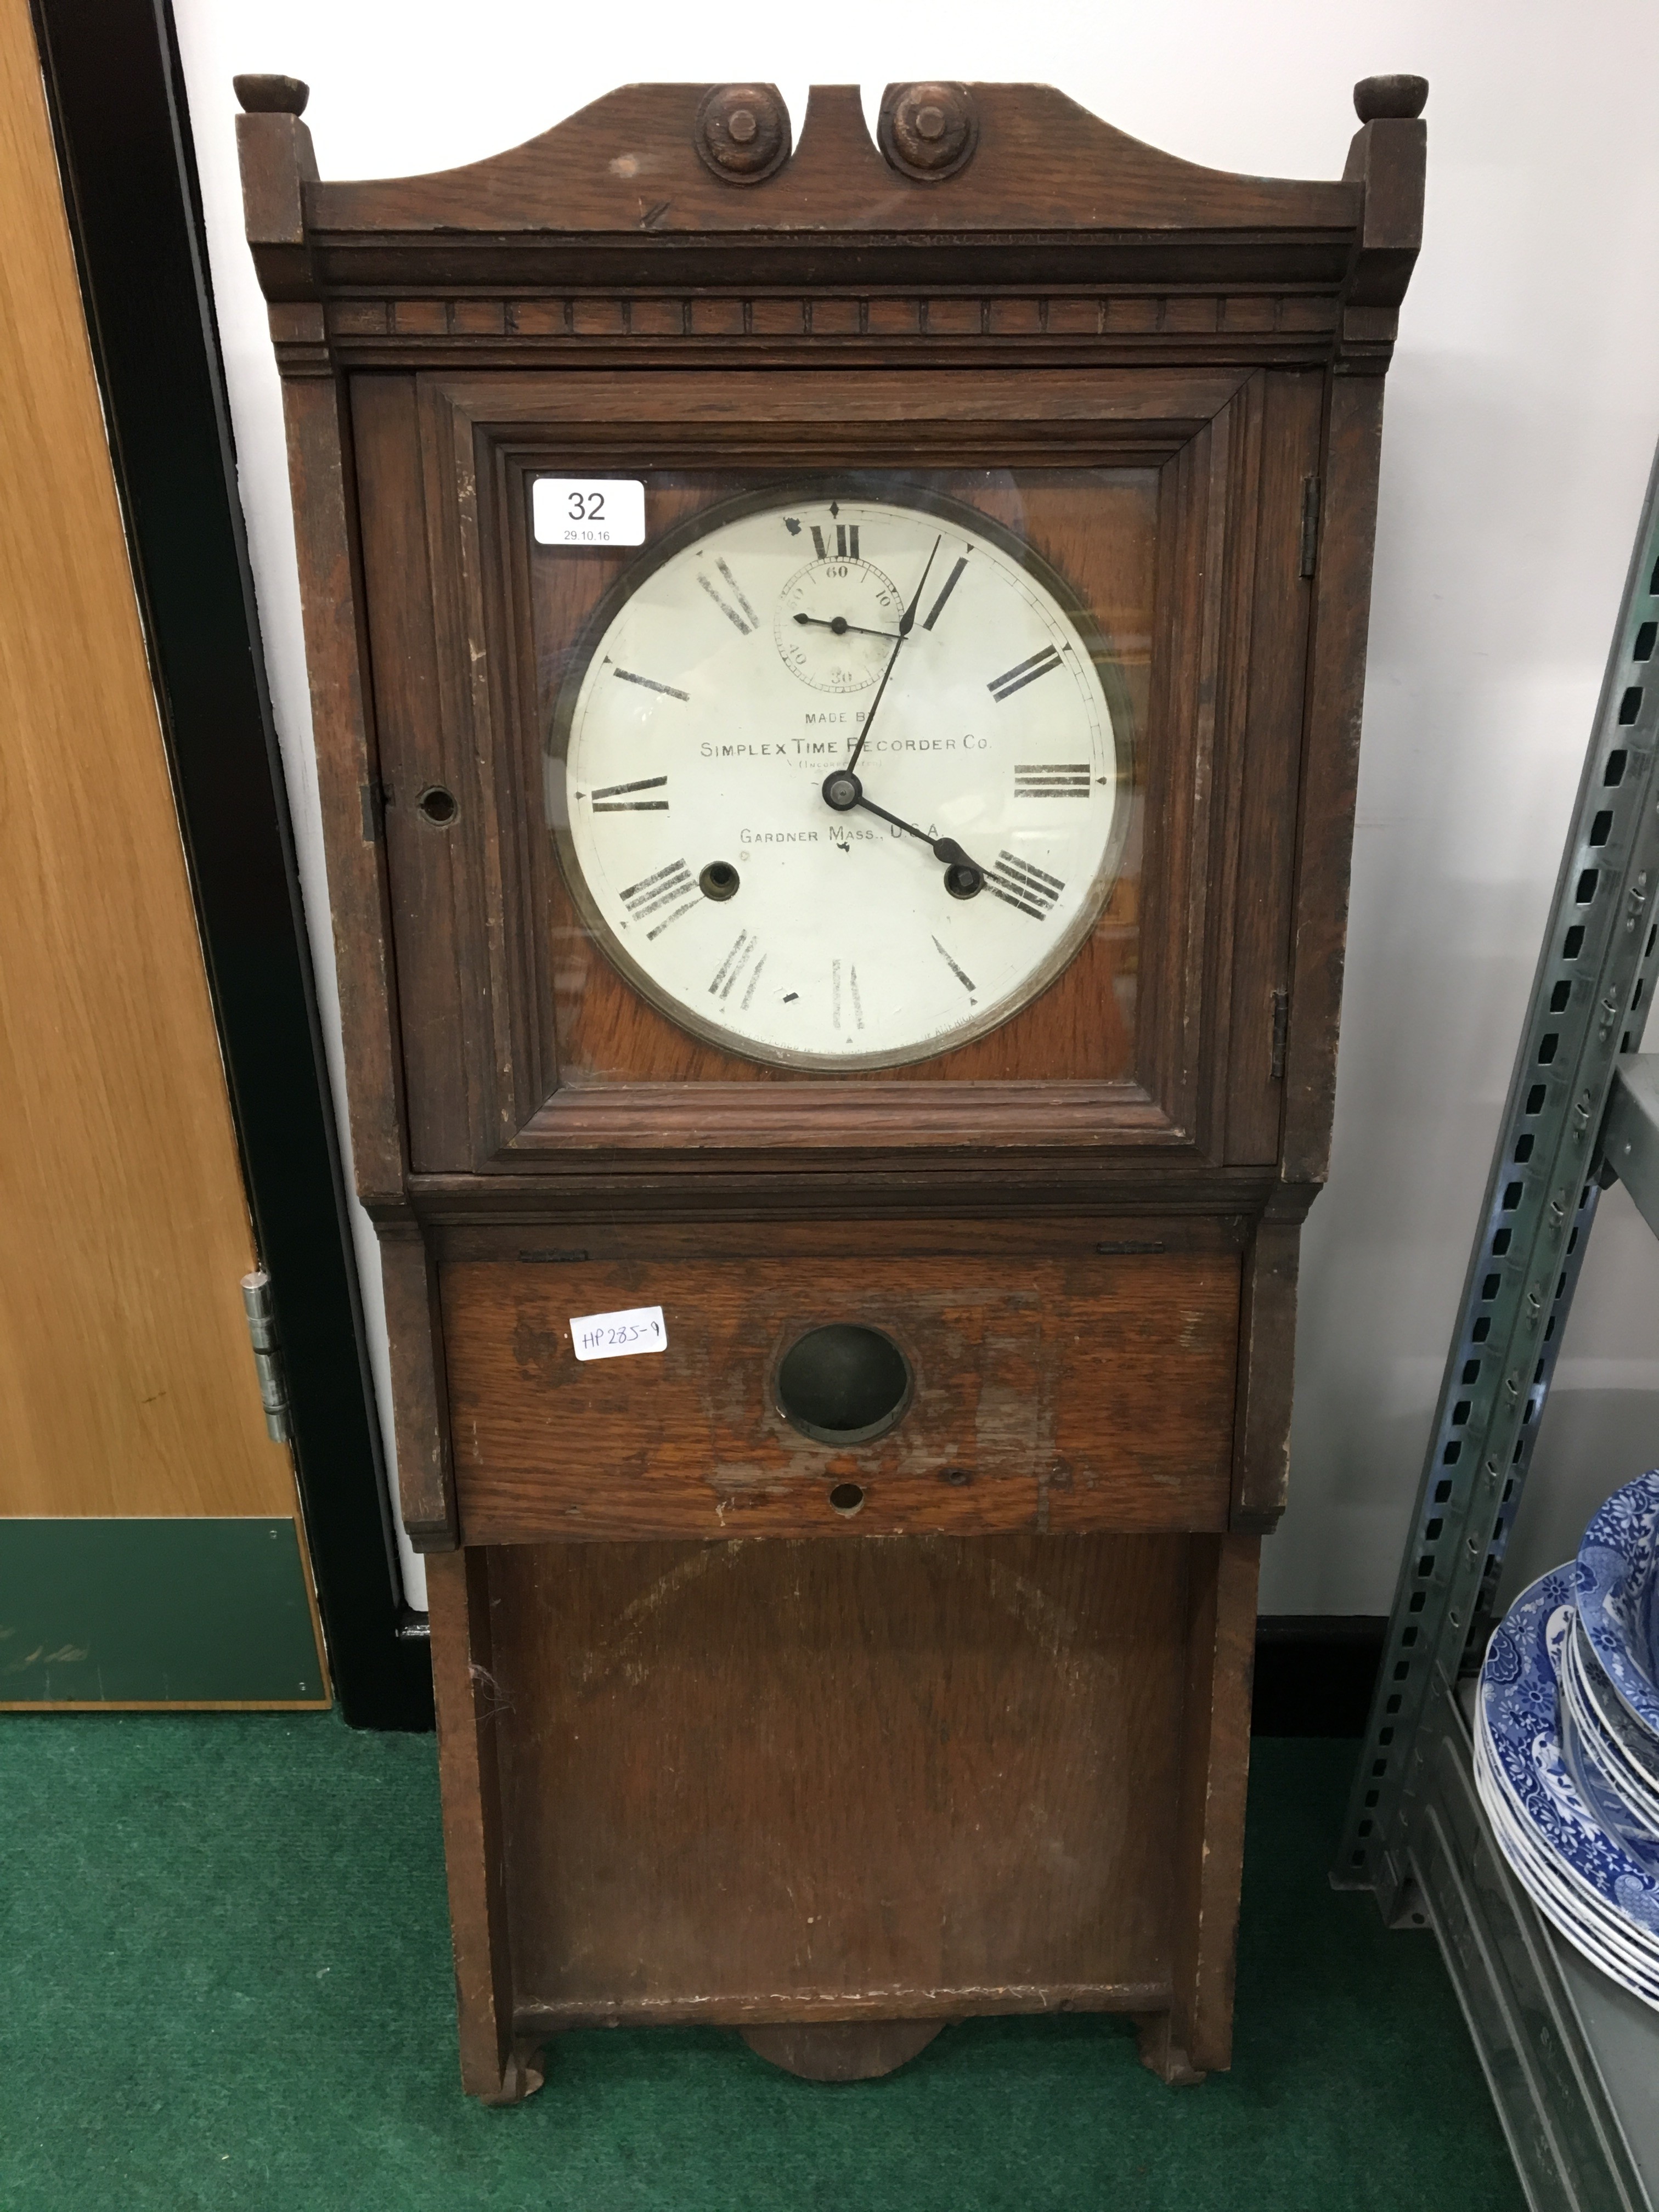 Early 20th century oak cased wall clock by Simplex Time Recorder Co, Gardener Mass, USA.